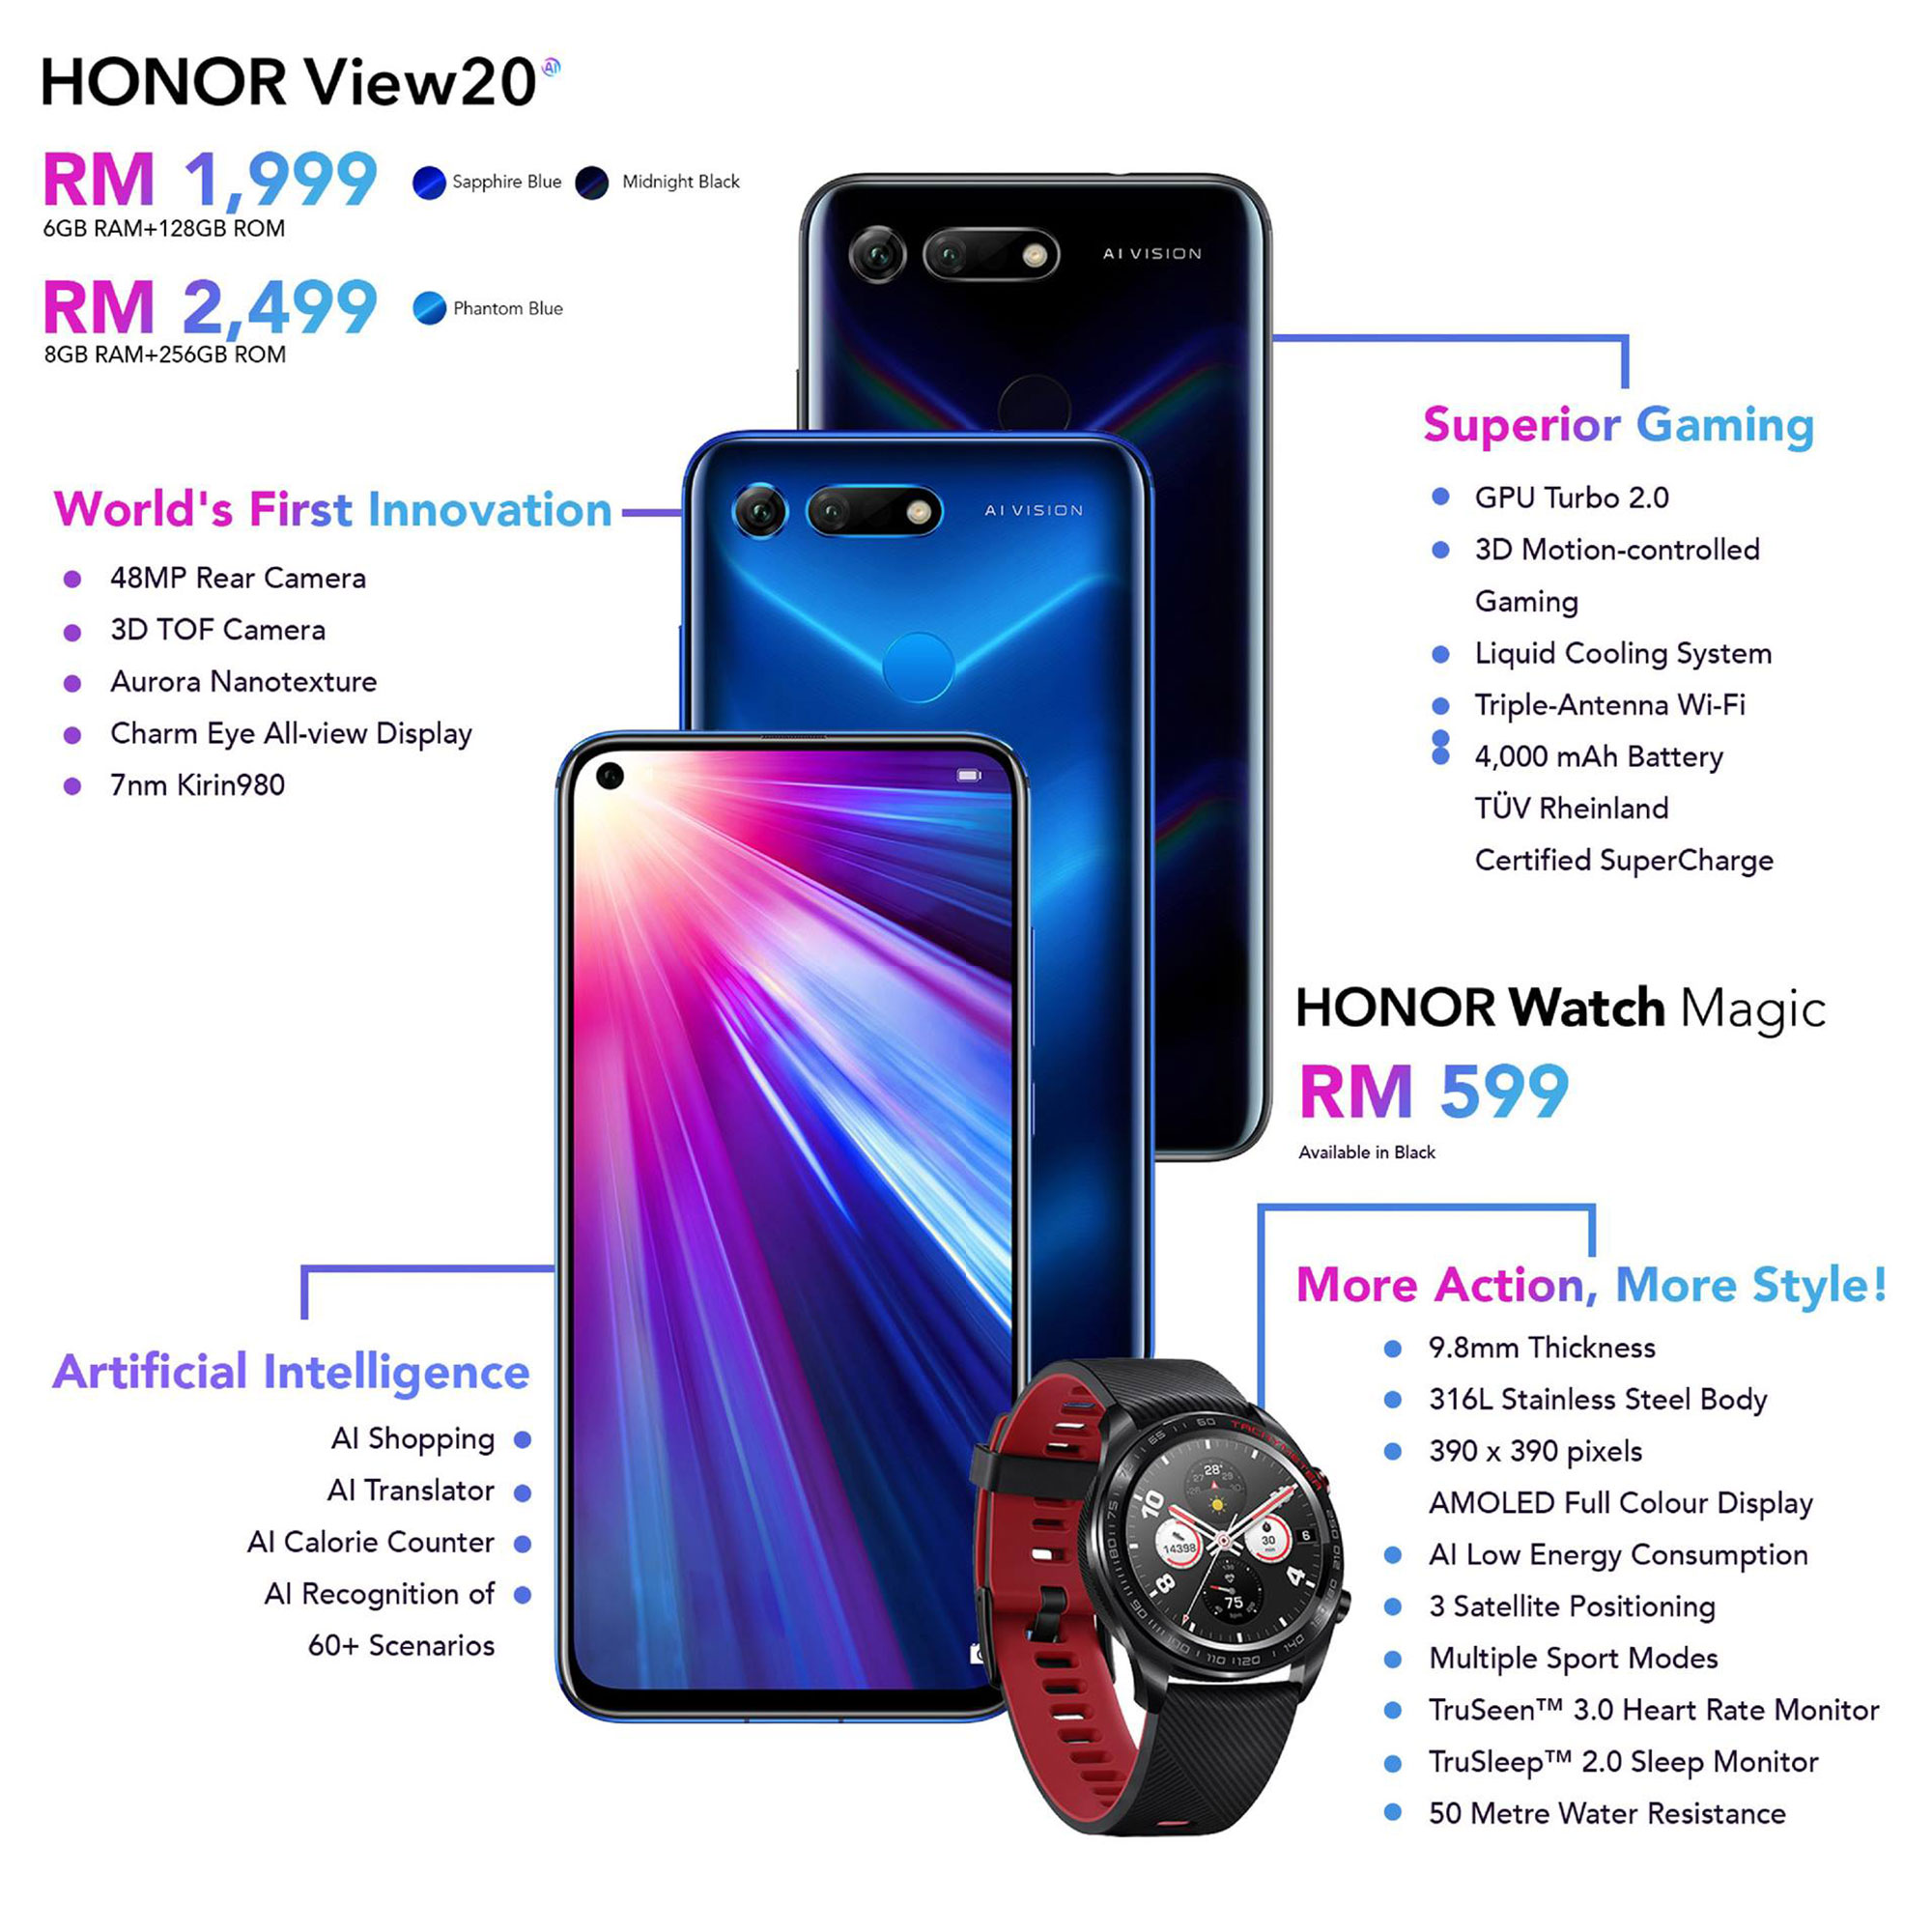 HONOR View20 and HONOR Watch Magic Pricing